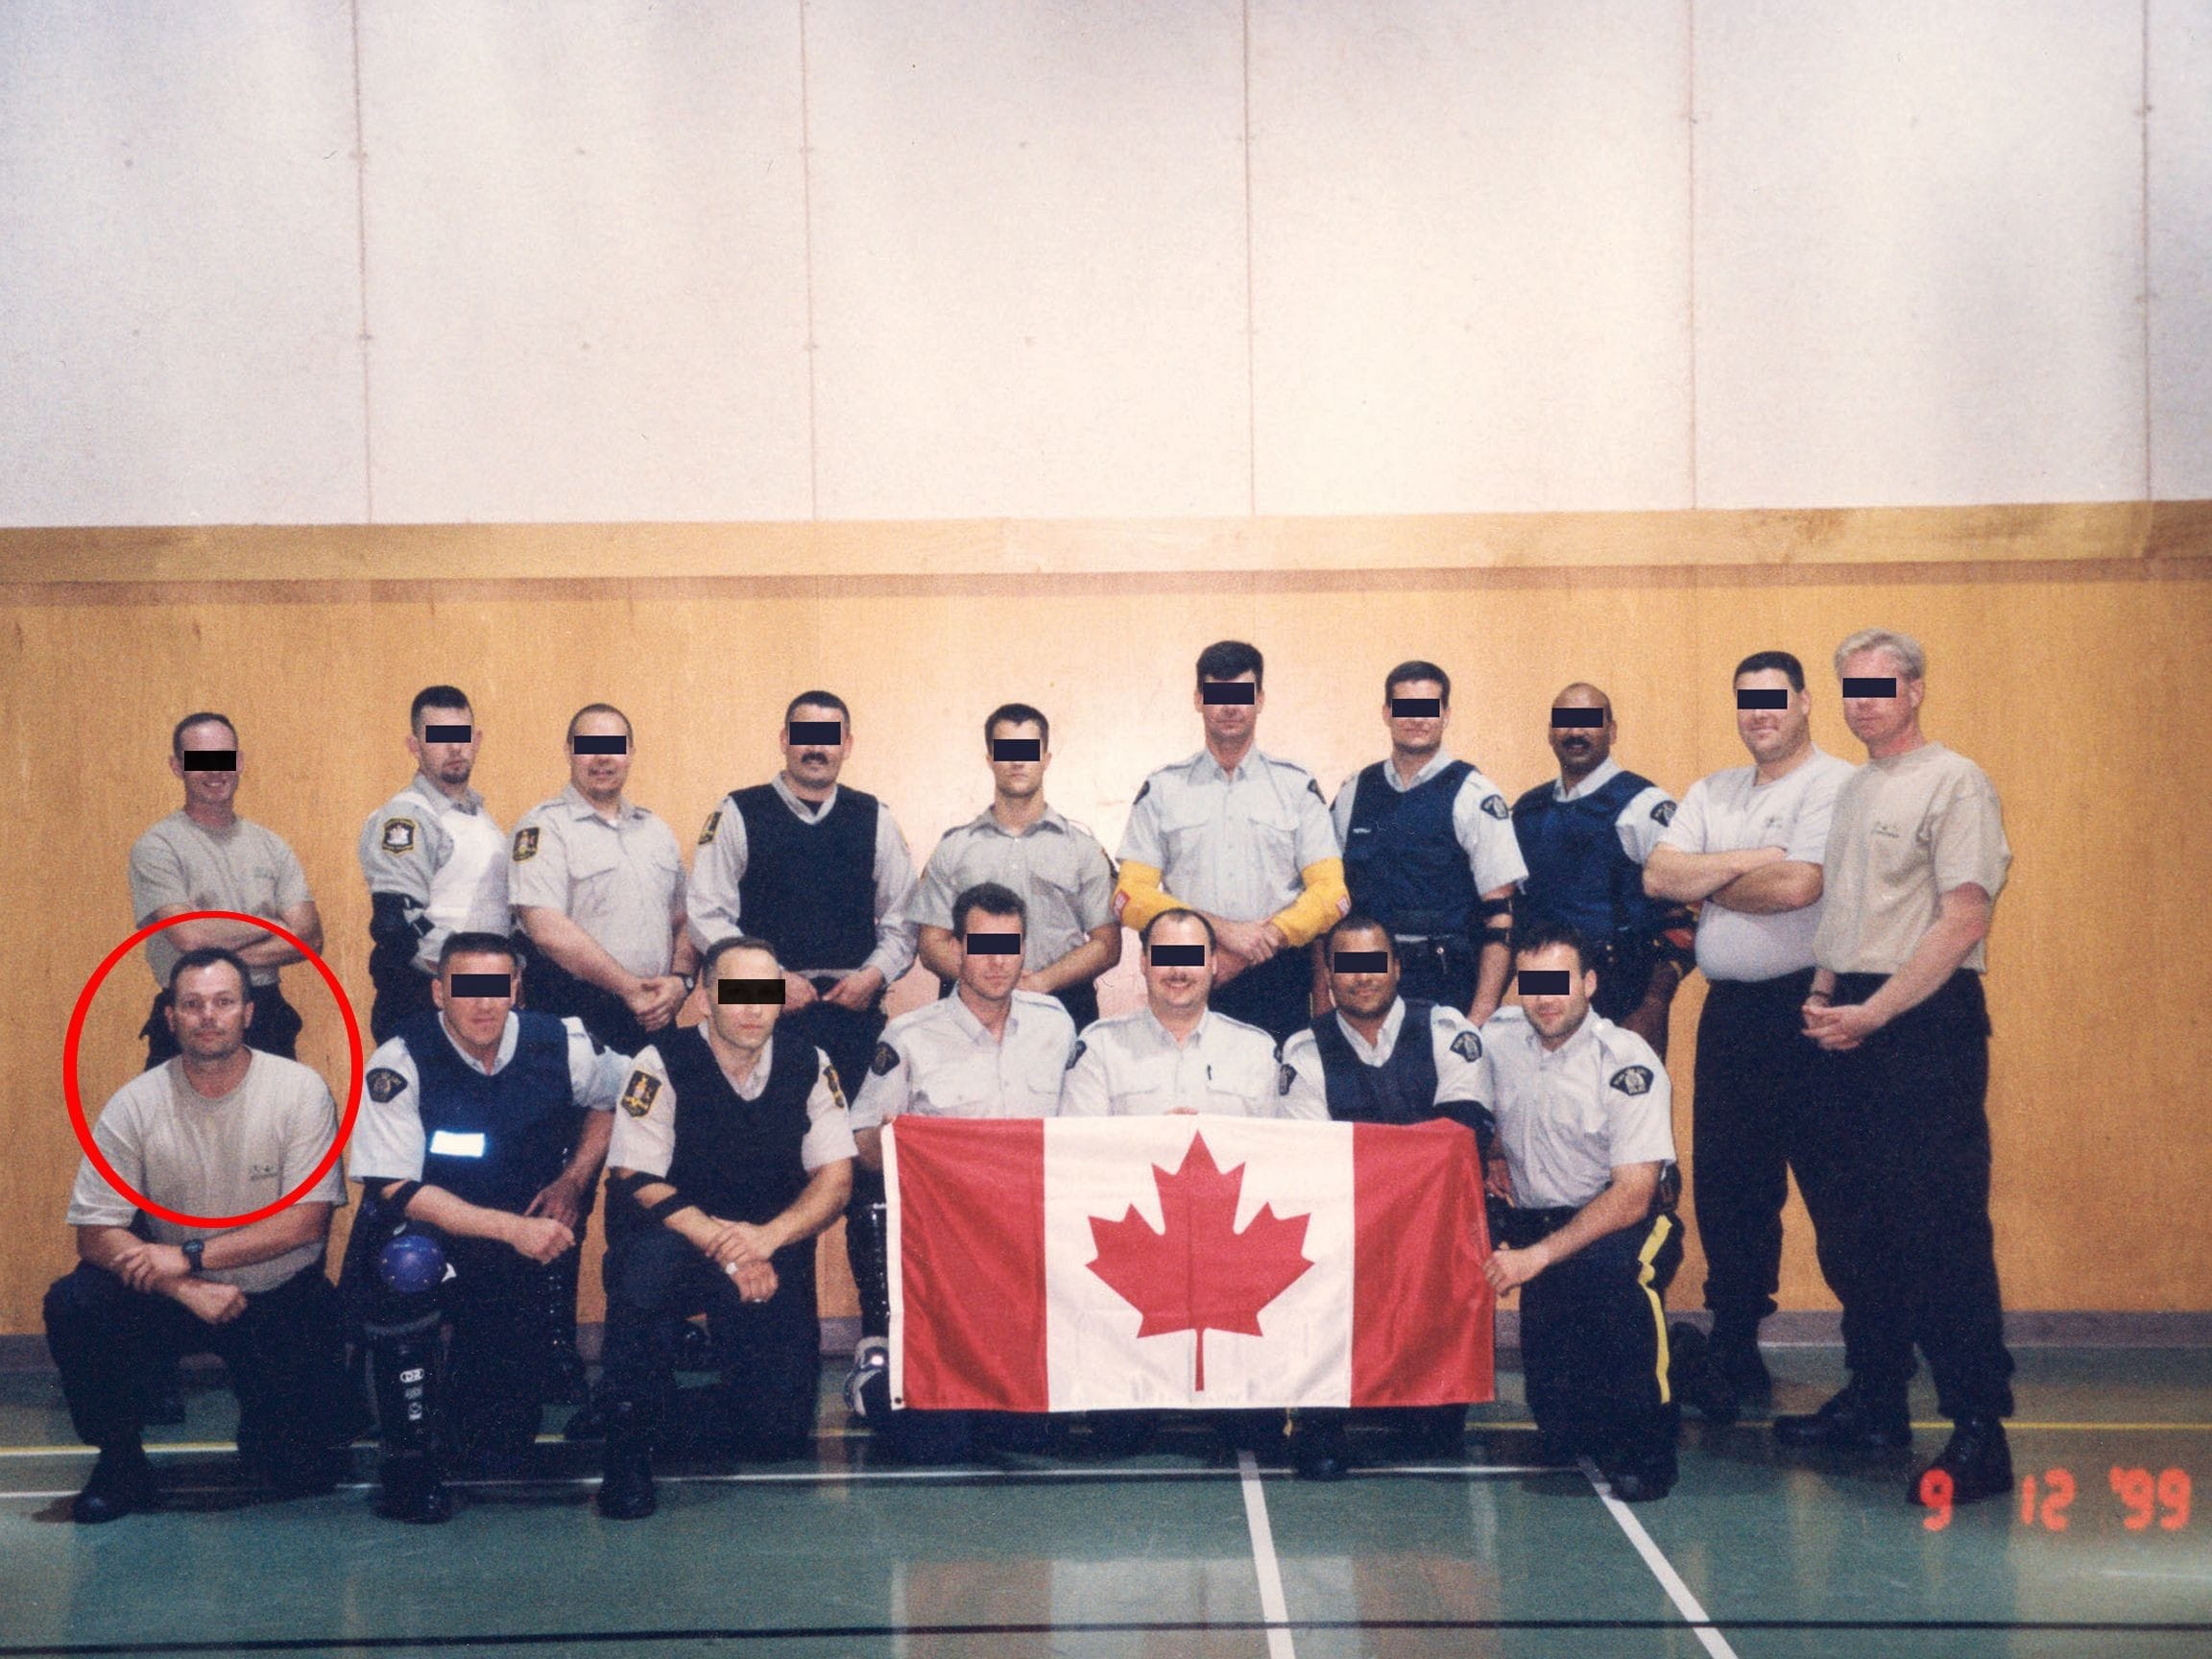 Here Jim (red circle) taught the Royal Canadian Mounted Police and the British Columbia Sheriff's Department constables in Defensive Tactics and Knife Survival.